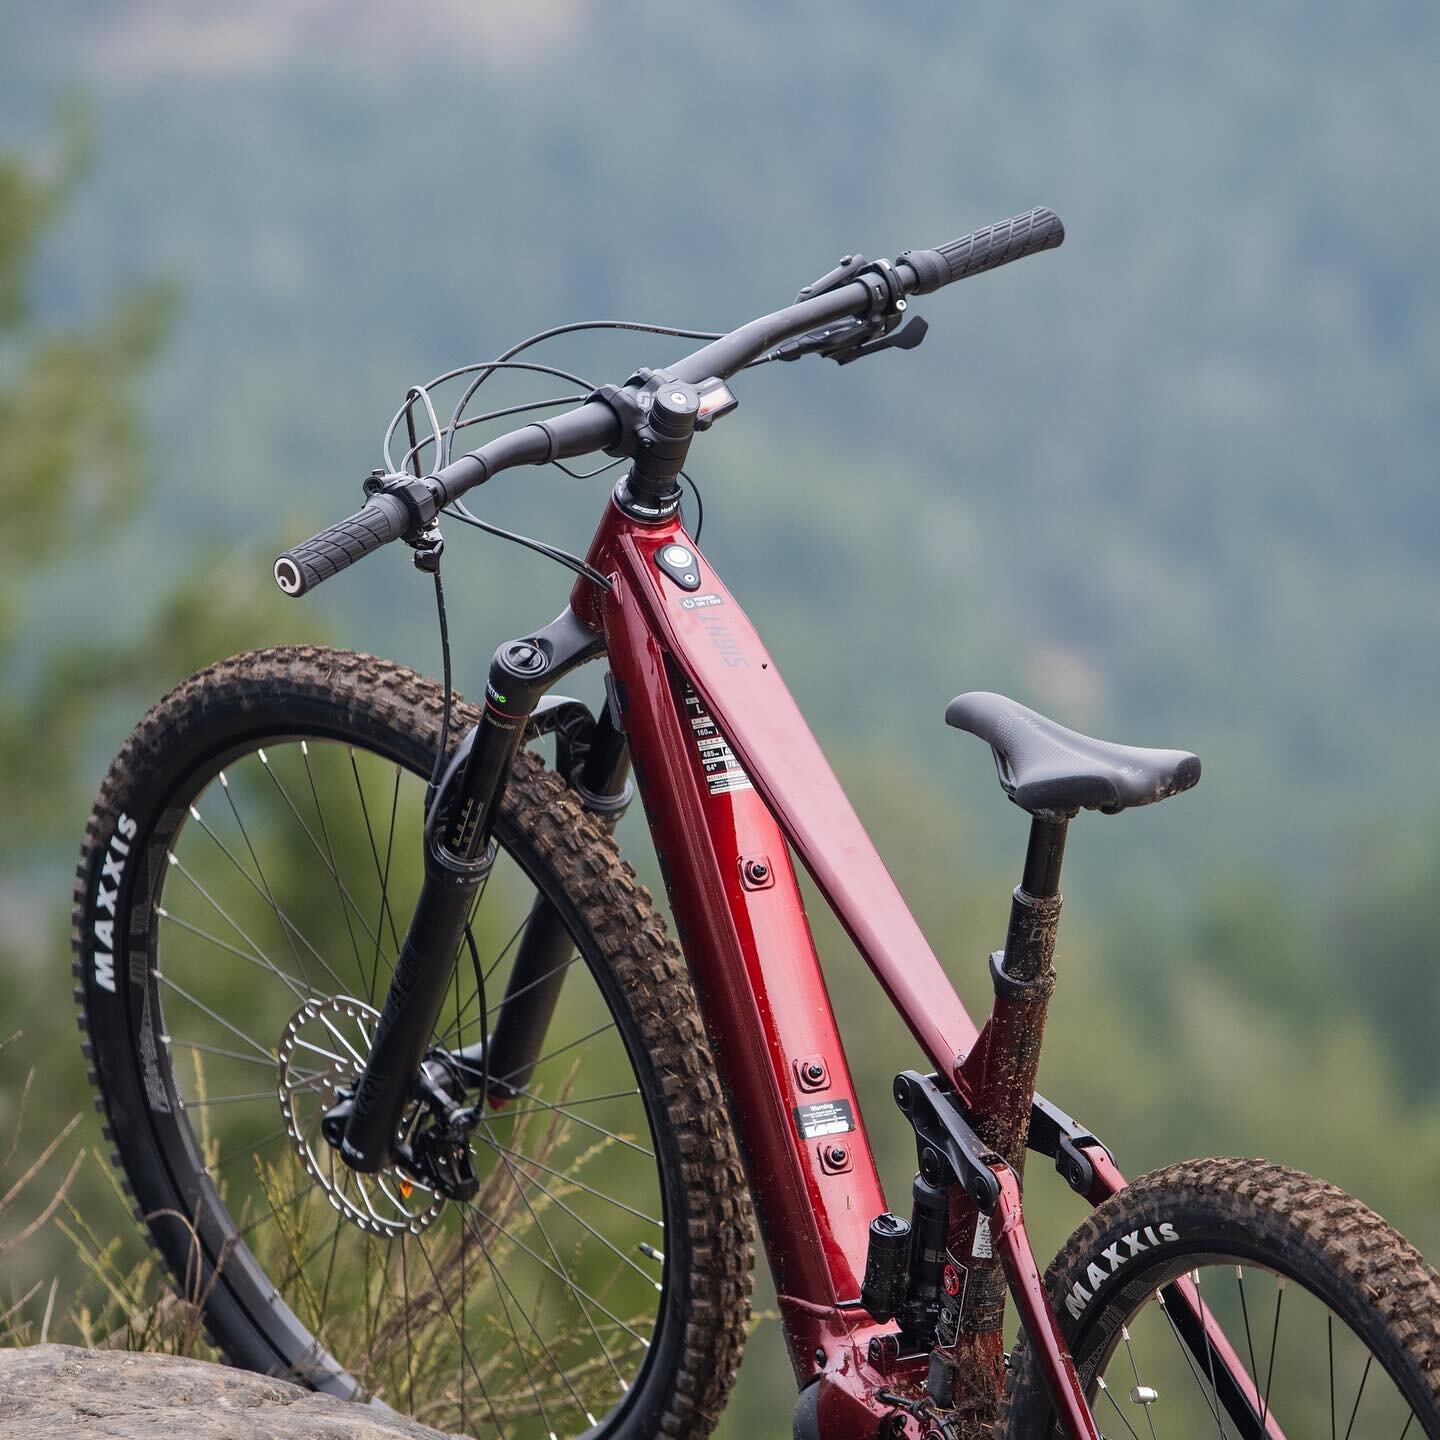 New bike made small work of its first summit - Norco Sight VLT is very sendy, and looks sharp. Stoked this was still available for this season! @westshorebikes #norcobikes #sightvlt #red #ebike #cameragearhaulingmachine #sooke #sookebc #vancouverisla